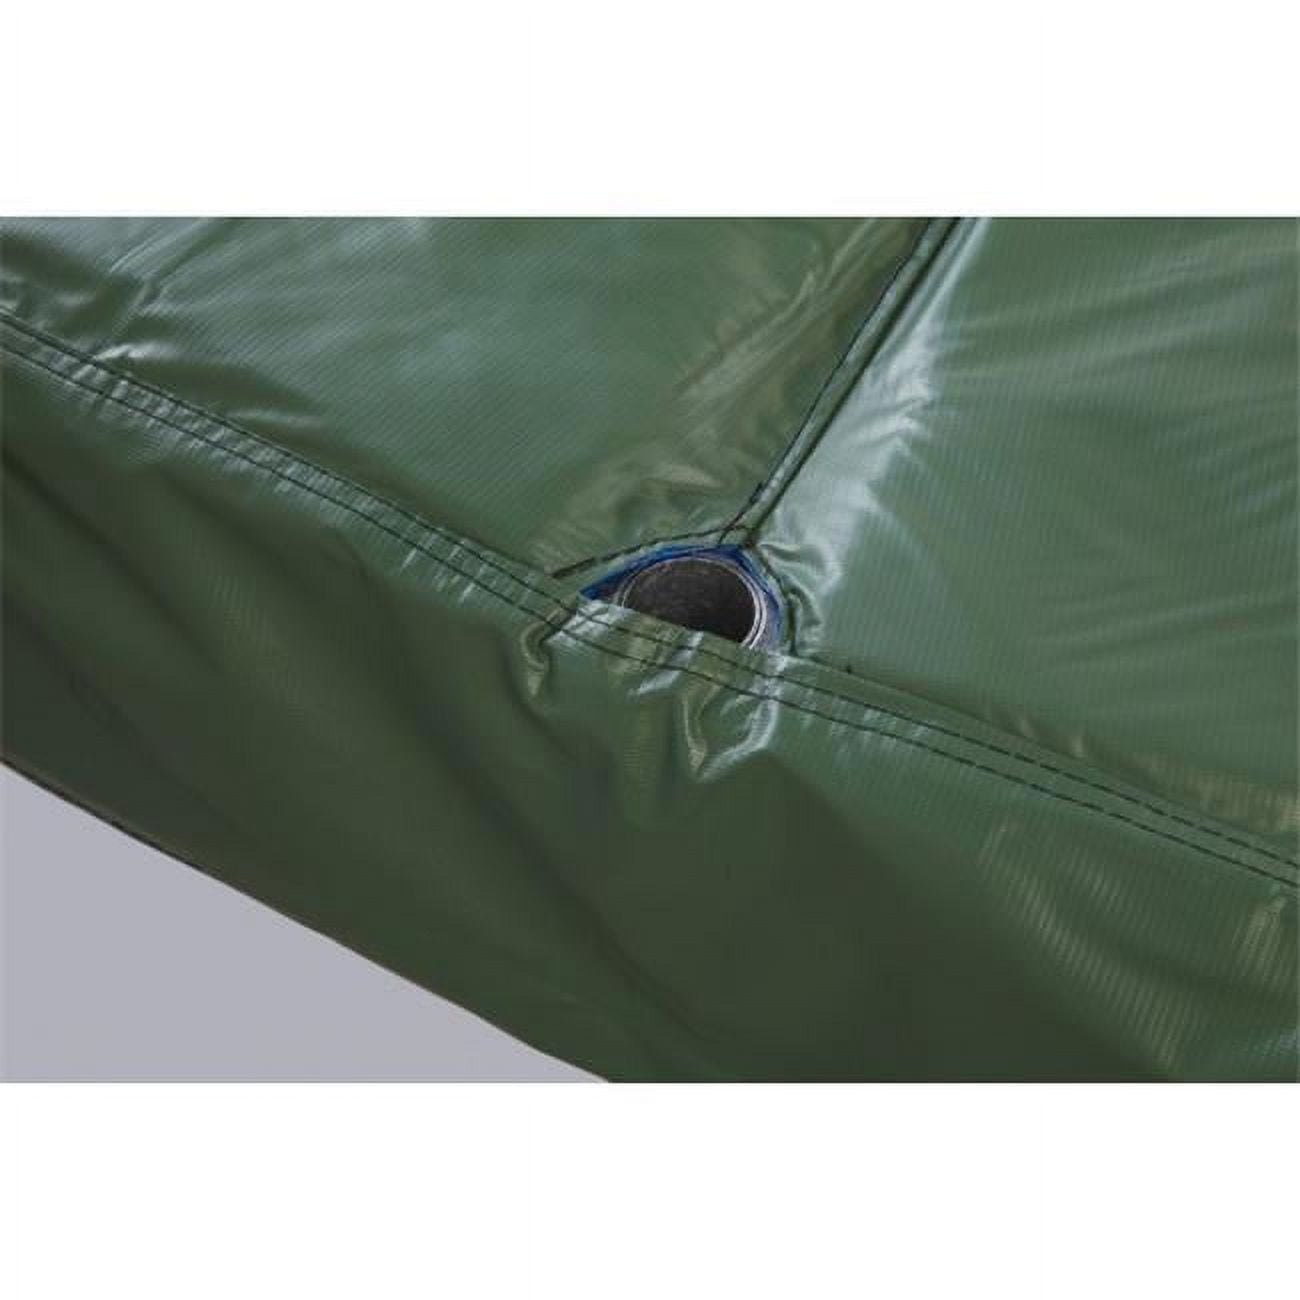 Pad15jp6-10g 15 Ft. Safety Pad For 6 Poles 10 In. Wide Pvc Green